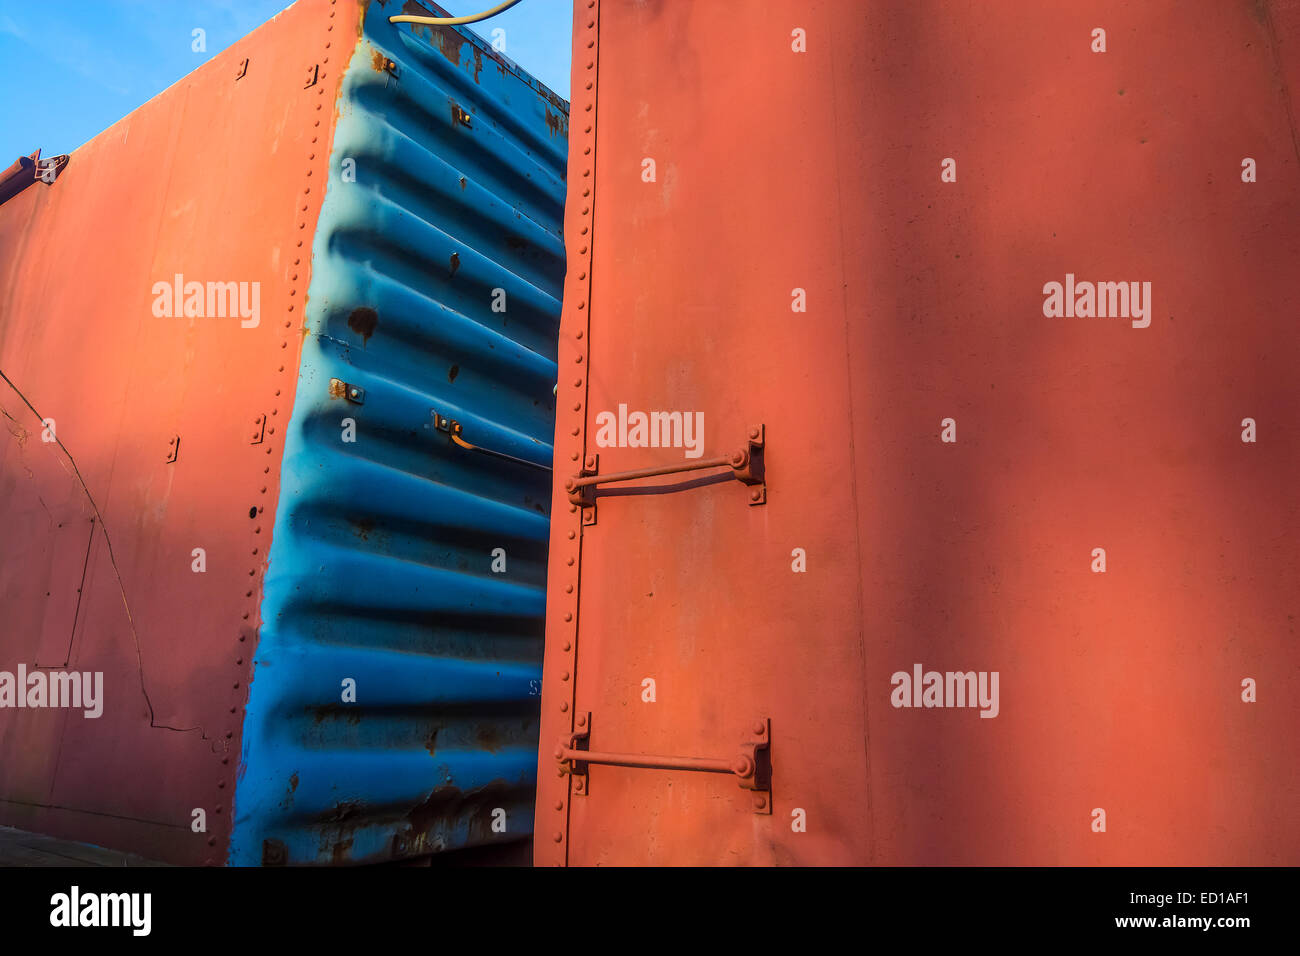 Colorful orange and blue railroad freight cars. Stock Photo